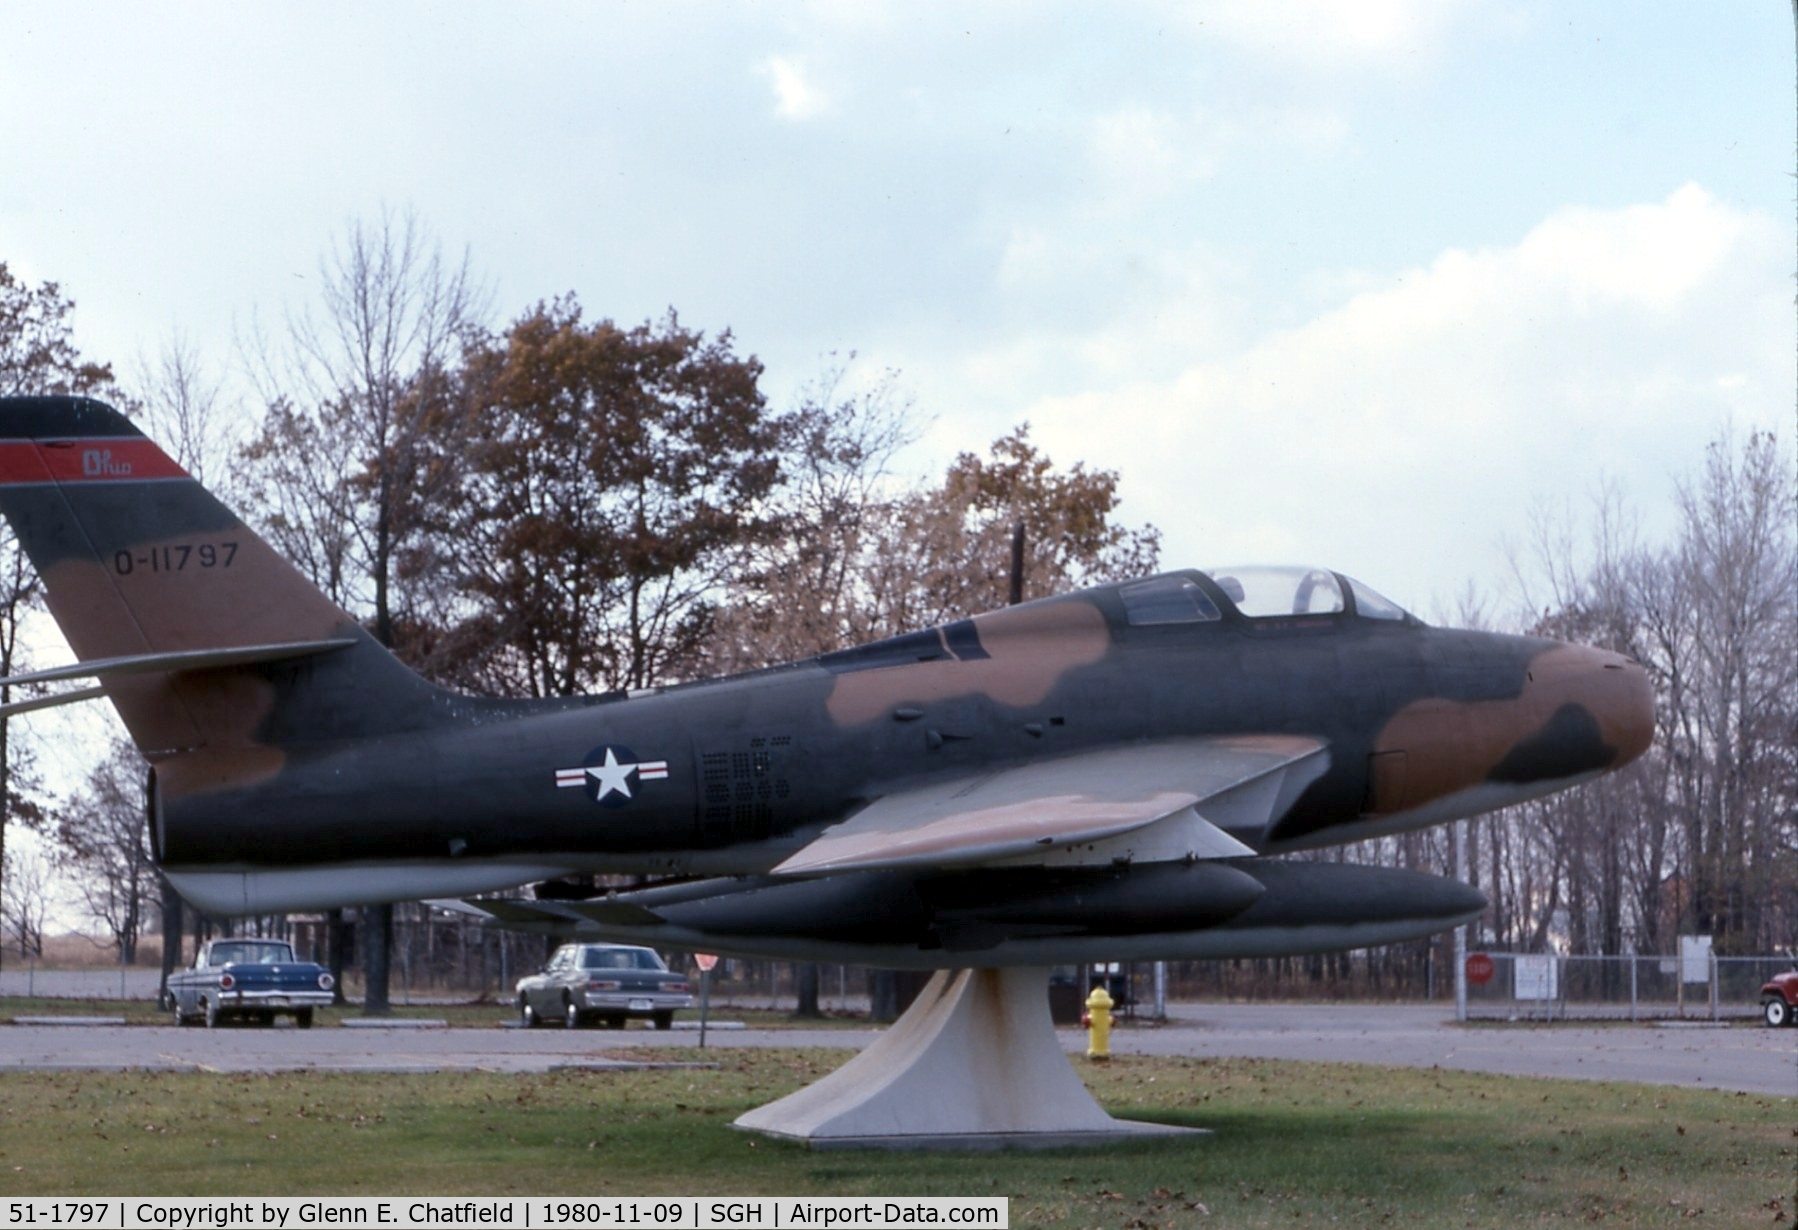 51-1797, 1951 Republic F-84F-30-RE Thunderstreak C/N Not found 51-1797, F-84F mounted at the Air National Guard base